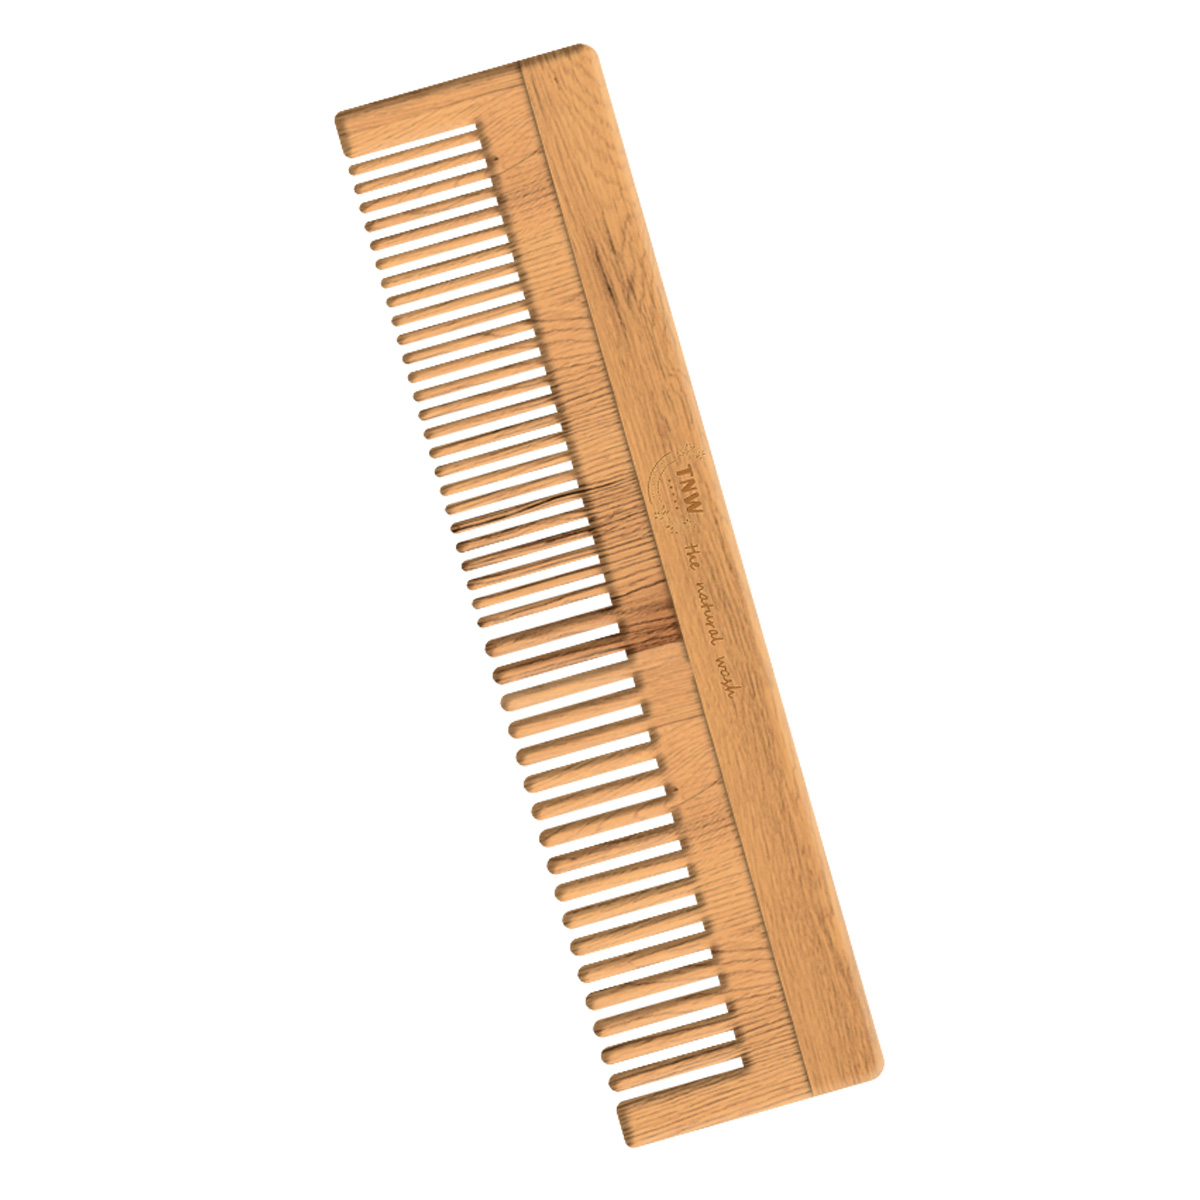 TNW - The Natural Wash Wood Neem Wood Comb For Healthy Hair & Scalp, 1Pc